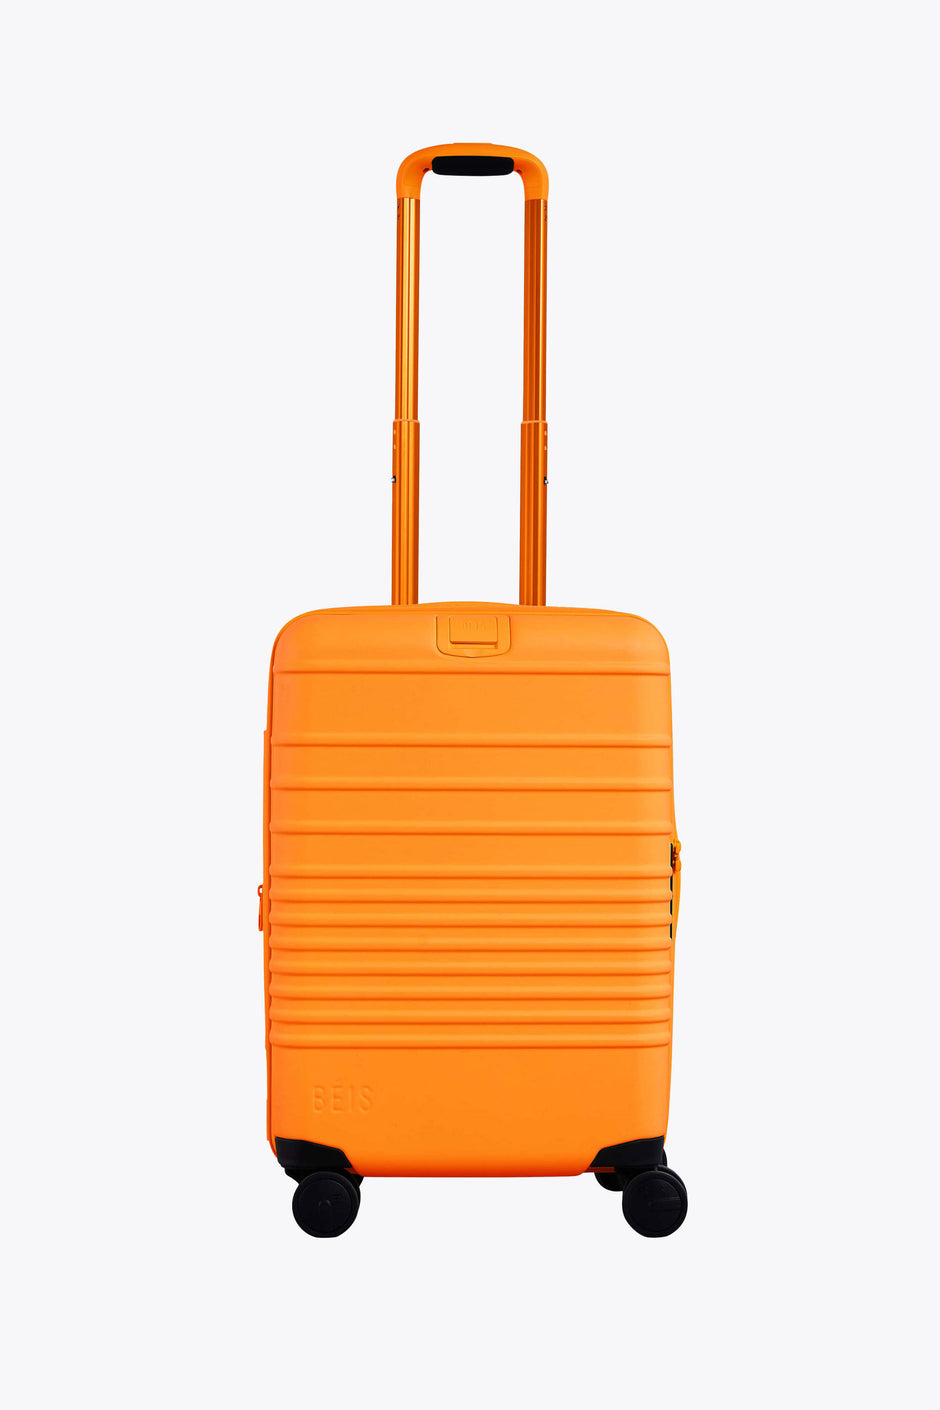 Carry-On Luggage - Hand Luggage & Carry On Suitcases | Béis Travel